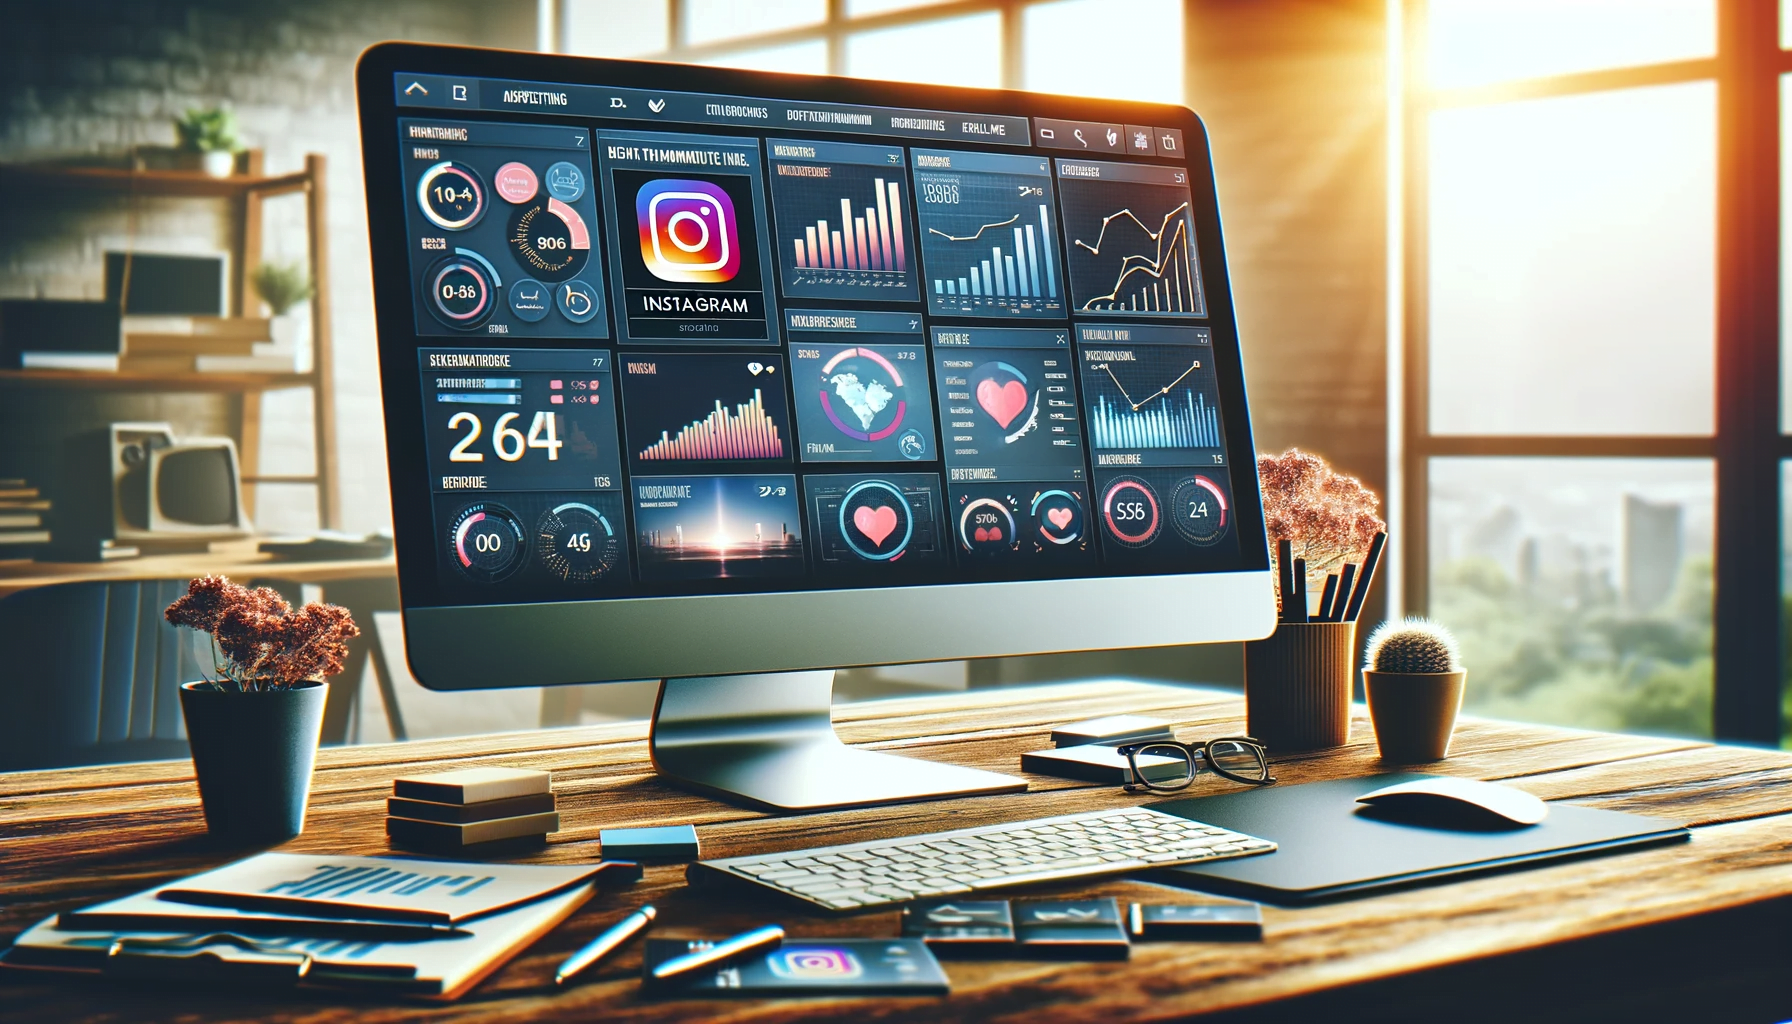 Professional digital marketing workspace with Instagram analytics and engagement data on screen, highlighting strategic Instagram advertising in 2024.